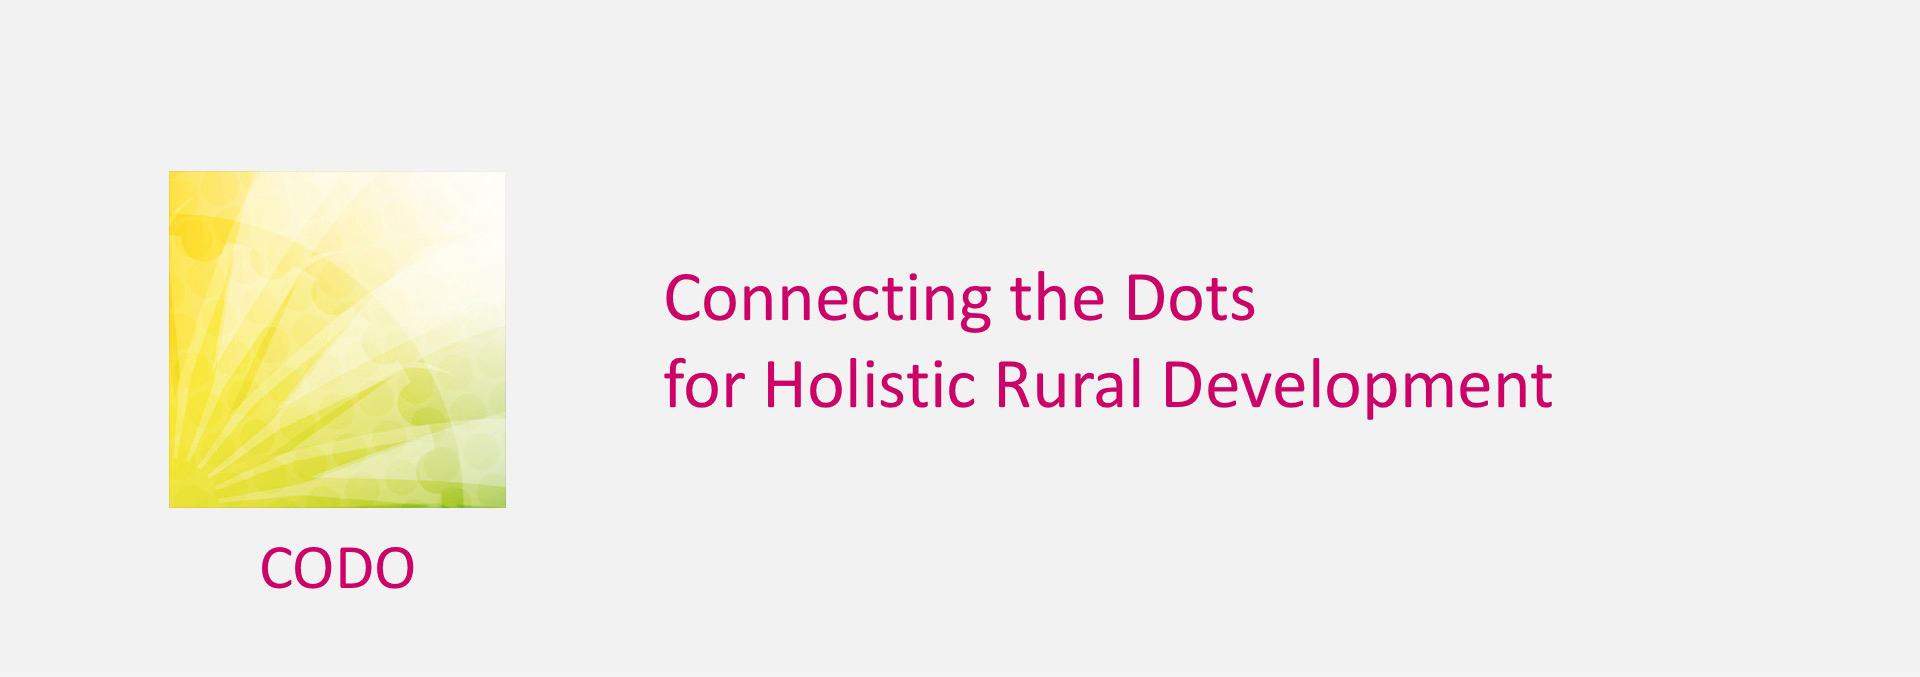 Connecting the Dots for Holistic Rural Development